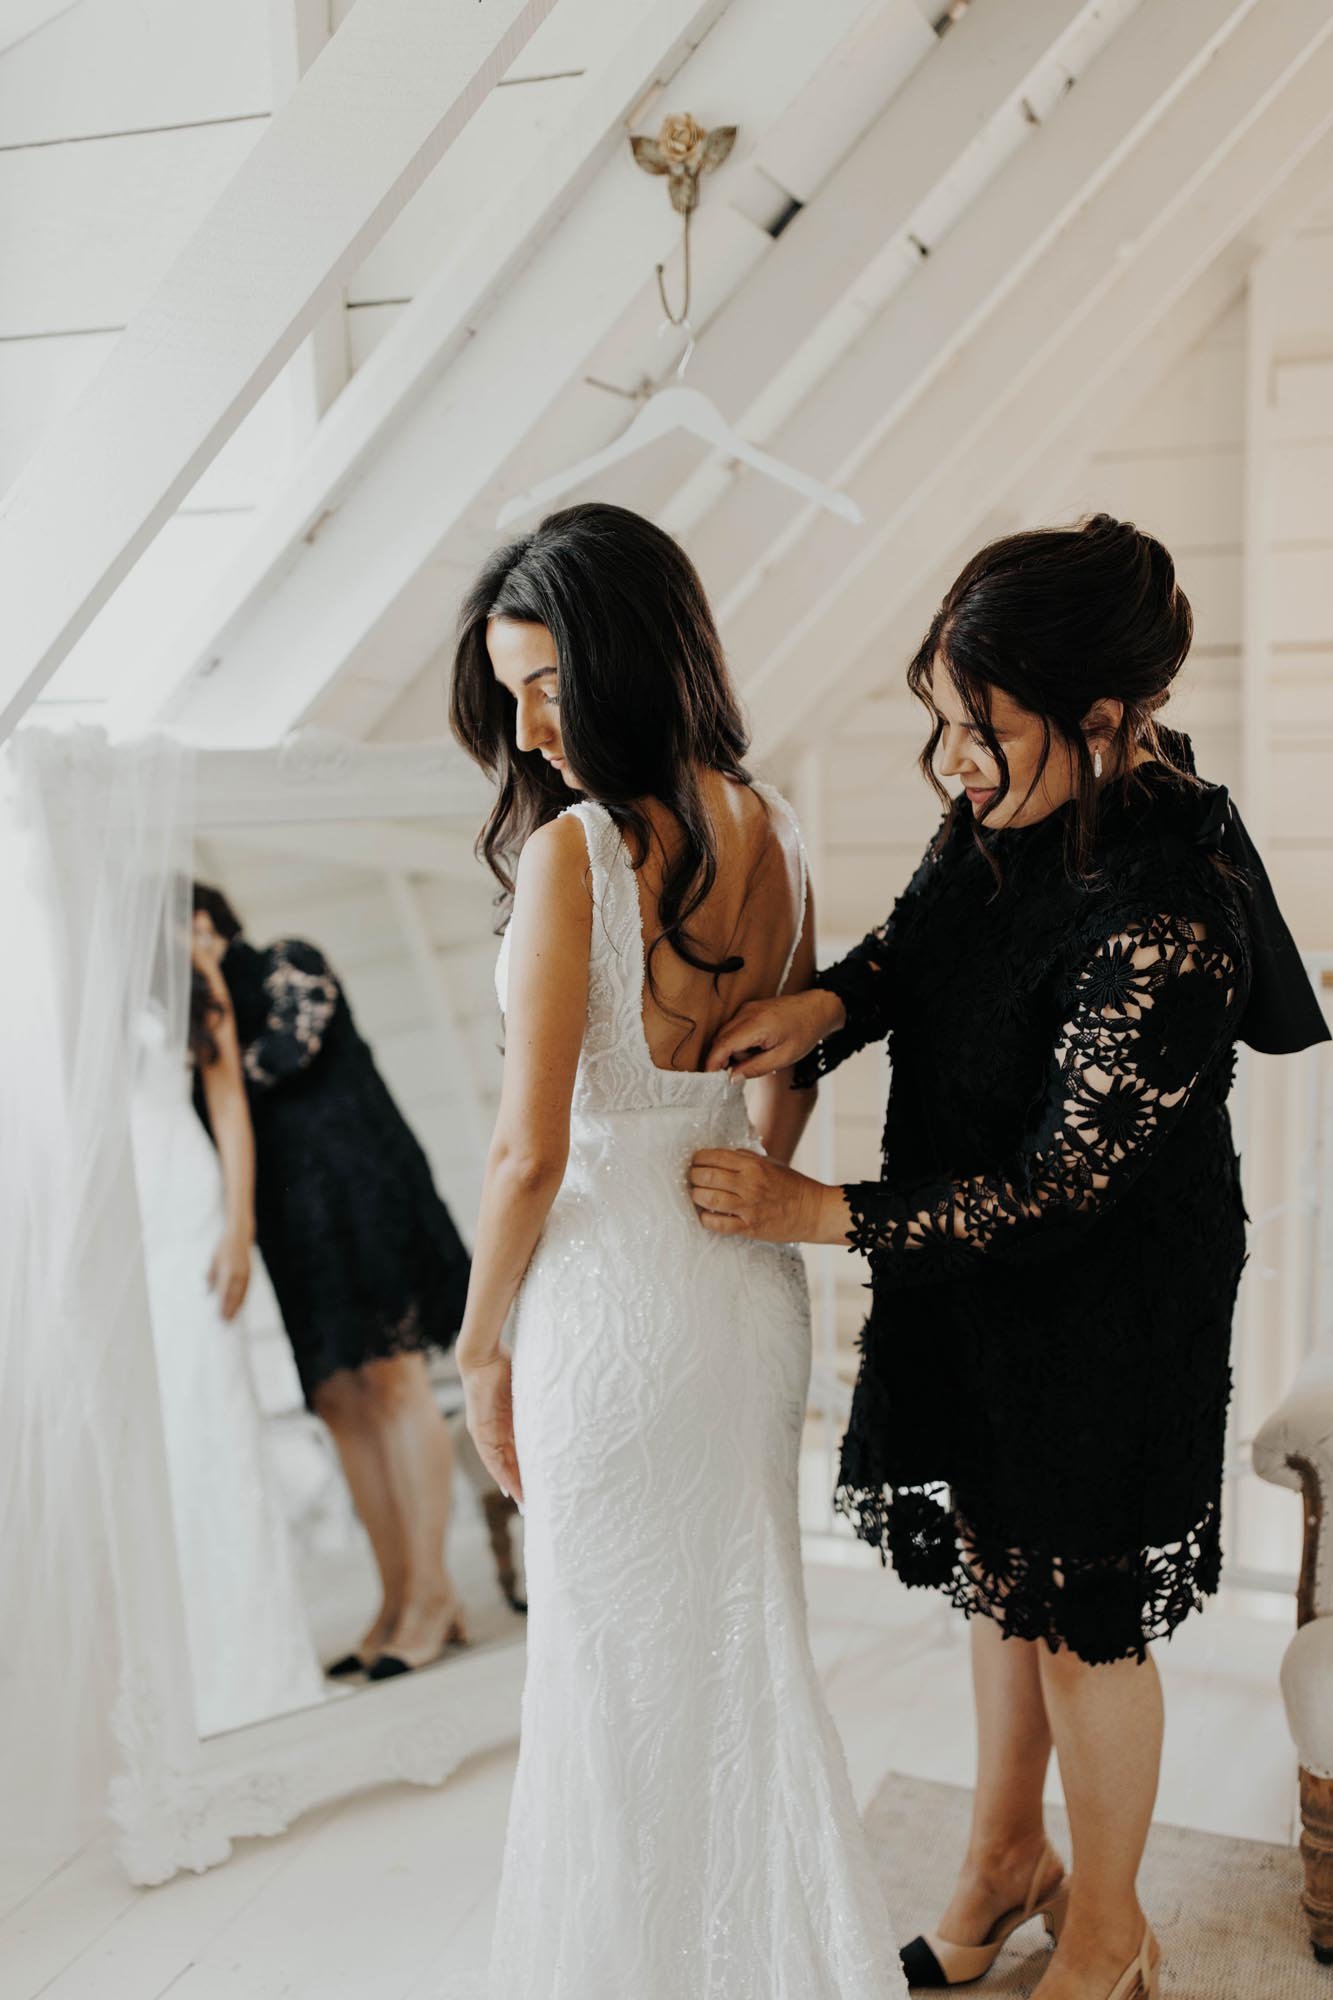  A bride getting ready for her big day while her mother helps zip her into her white beaded wedding dress. 